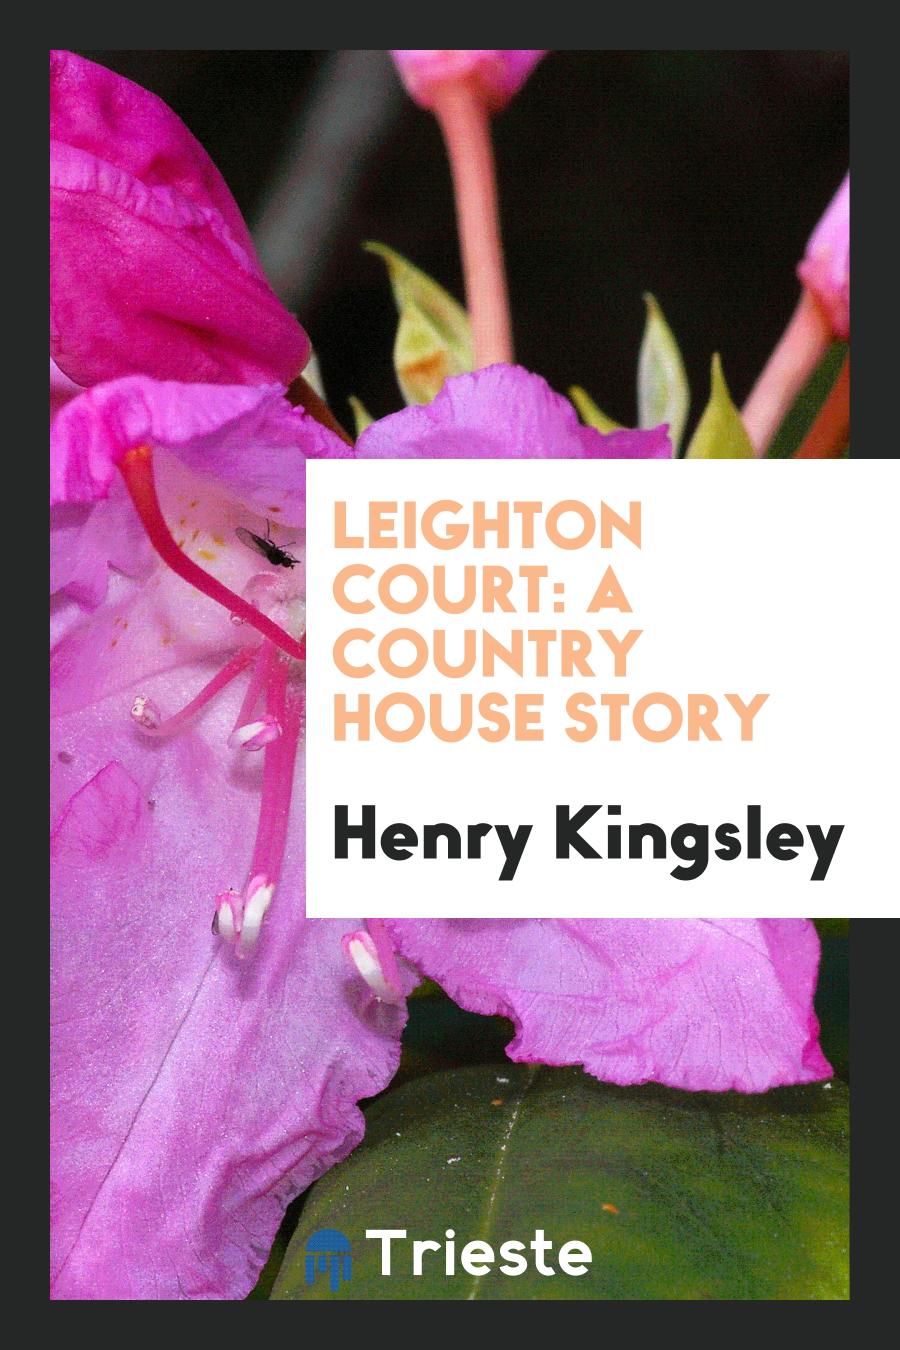 Leighton Court: A Country House Story